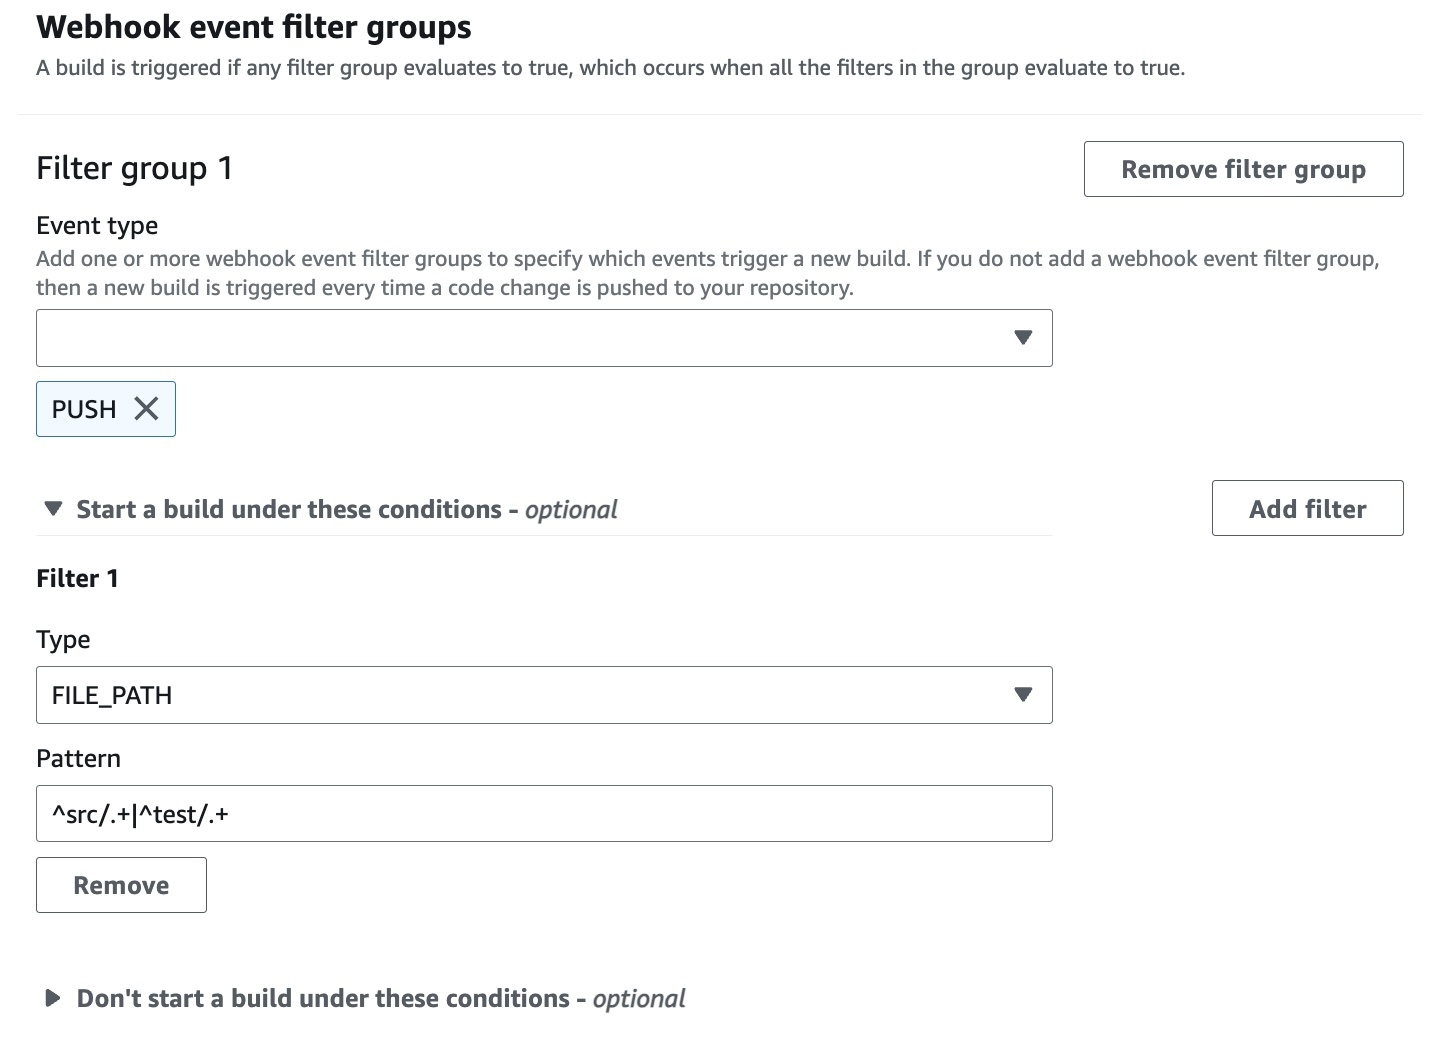 A webhook filter group that triggers a build only when files are changed in specified folders.